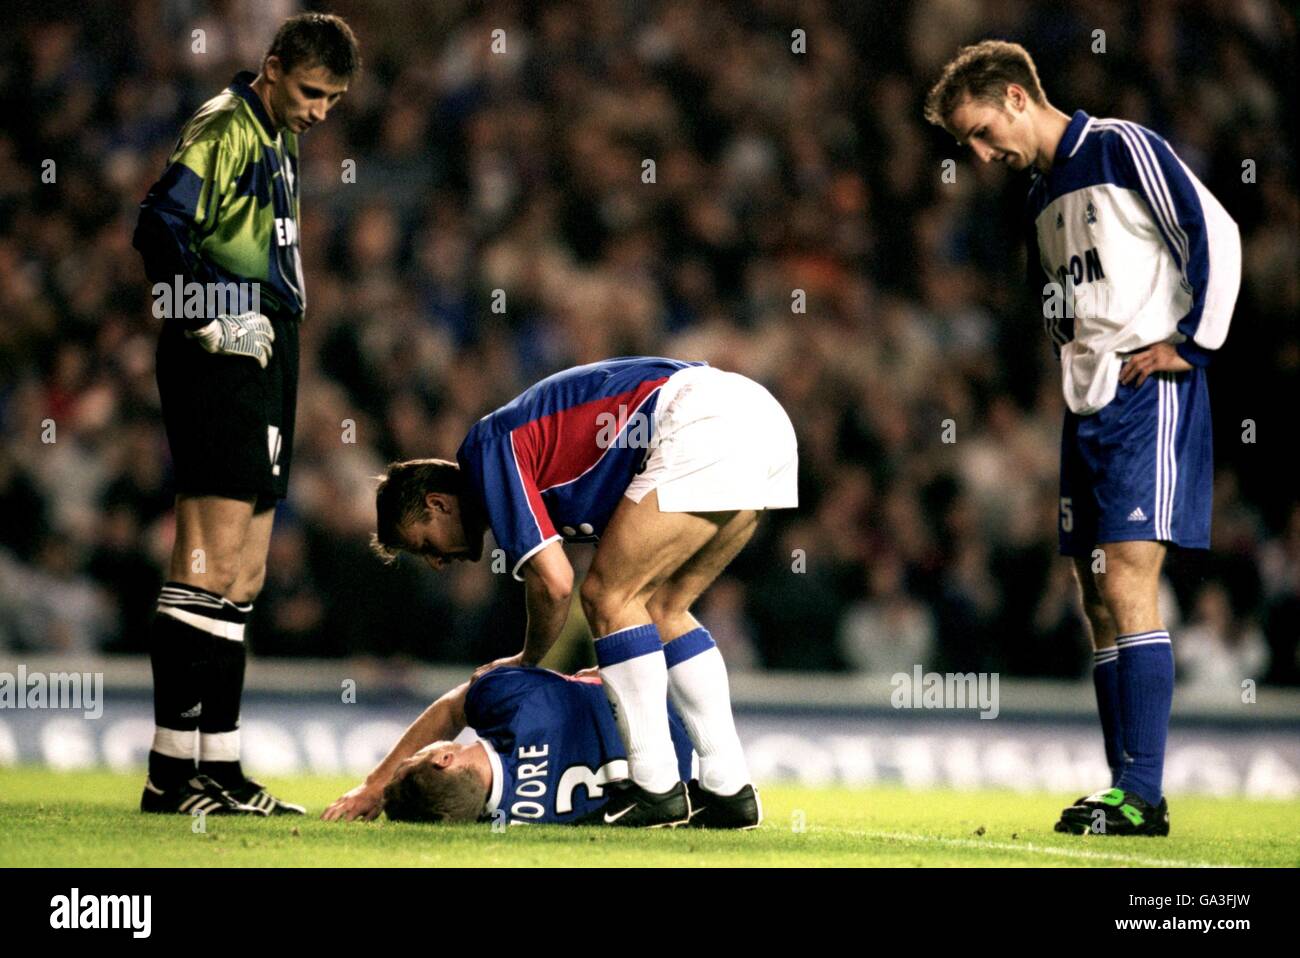 Rangers' Craig Moore lies injured on the floor as his teammate Arthur Numan checks his condition whilst Dinamo Moscow's Darius Zutautas (r) and goalkeeper Vasily Khonutovsky (l) look on Stock Photo